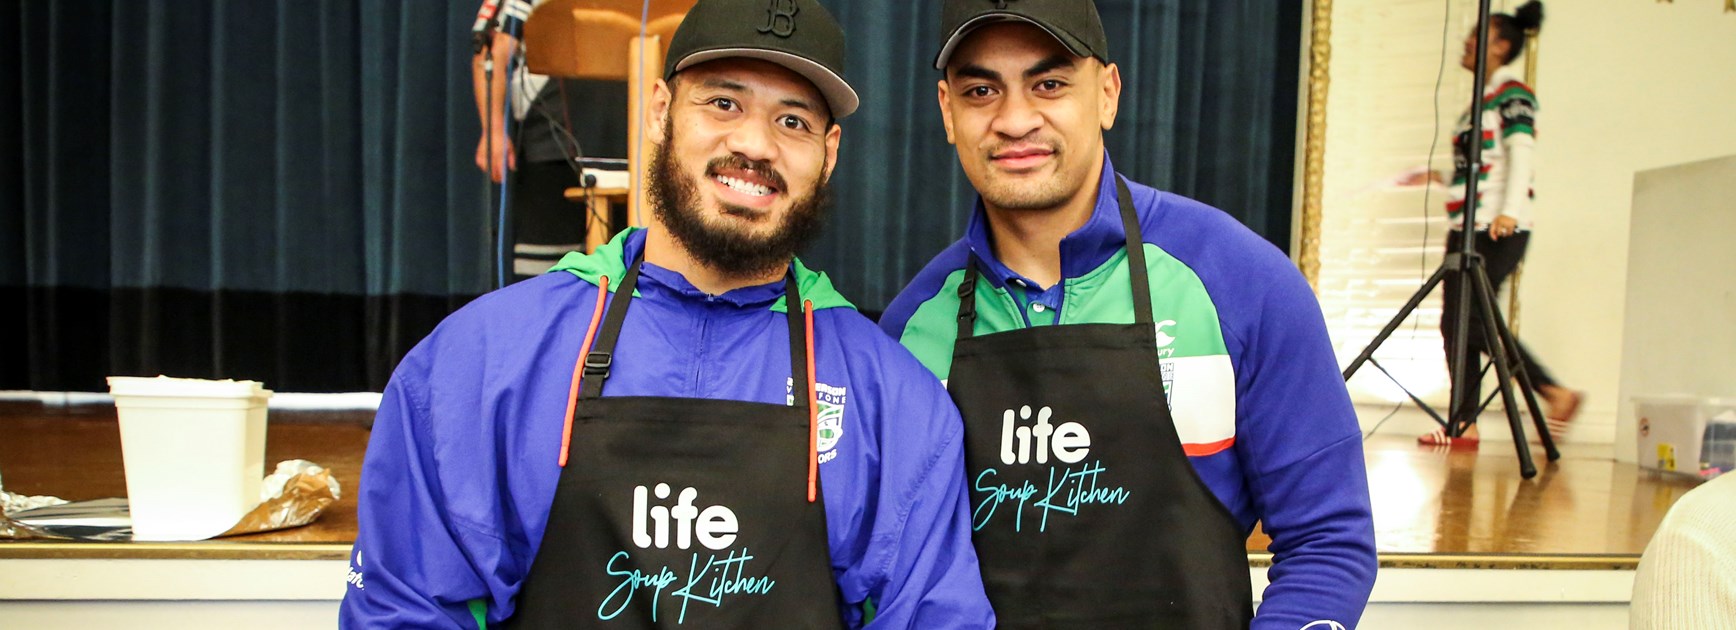 The Warriors lend a hand at the LIFE soup kitchen.